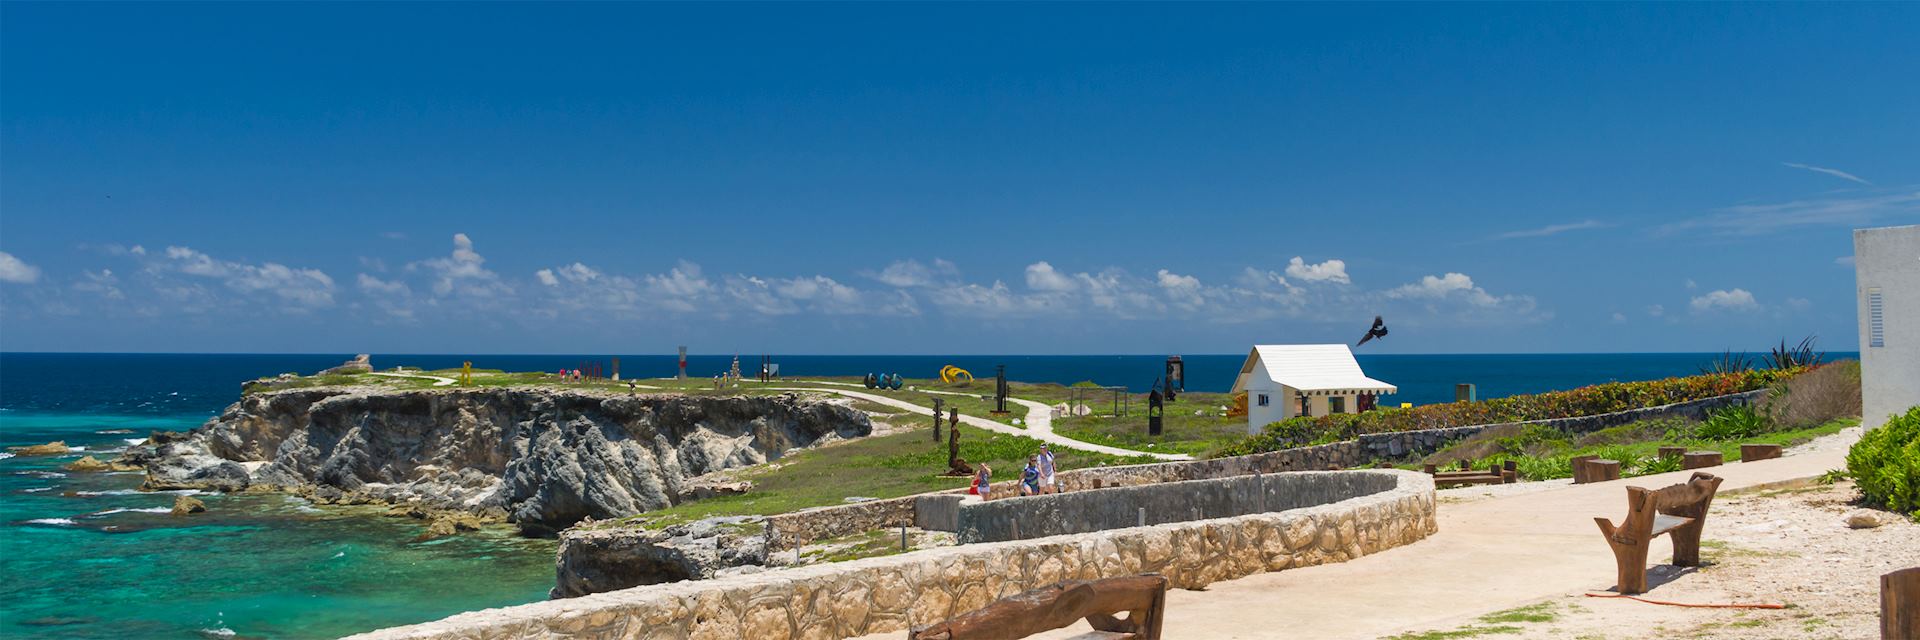 Visit Isla Mujeres on a trip to Mexico | Audley Travel